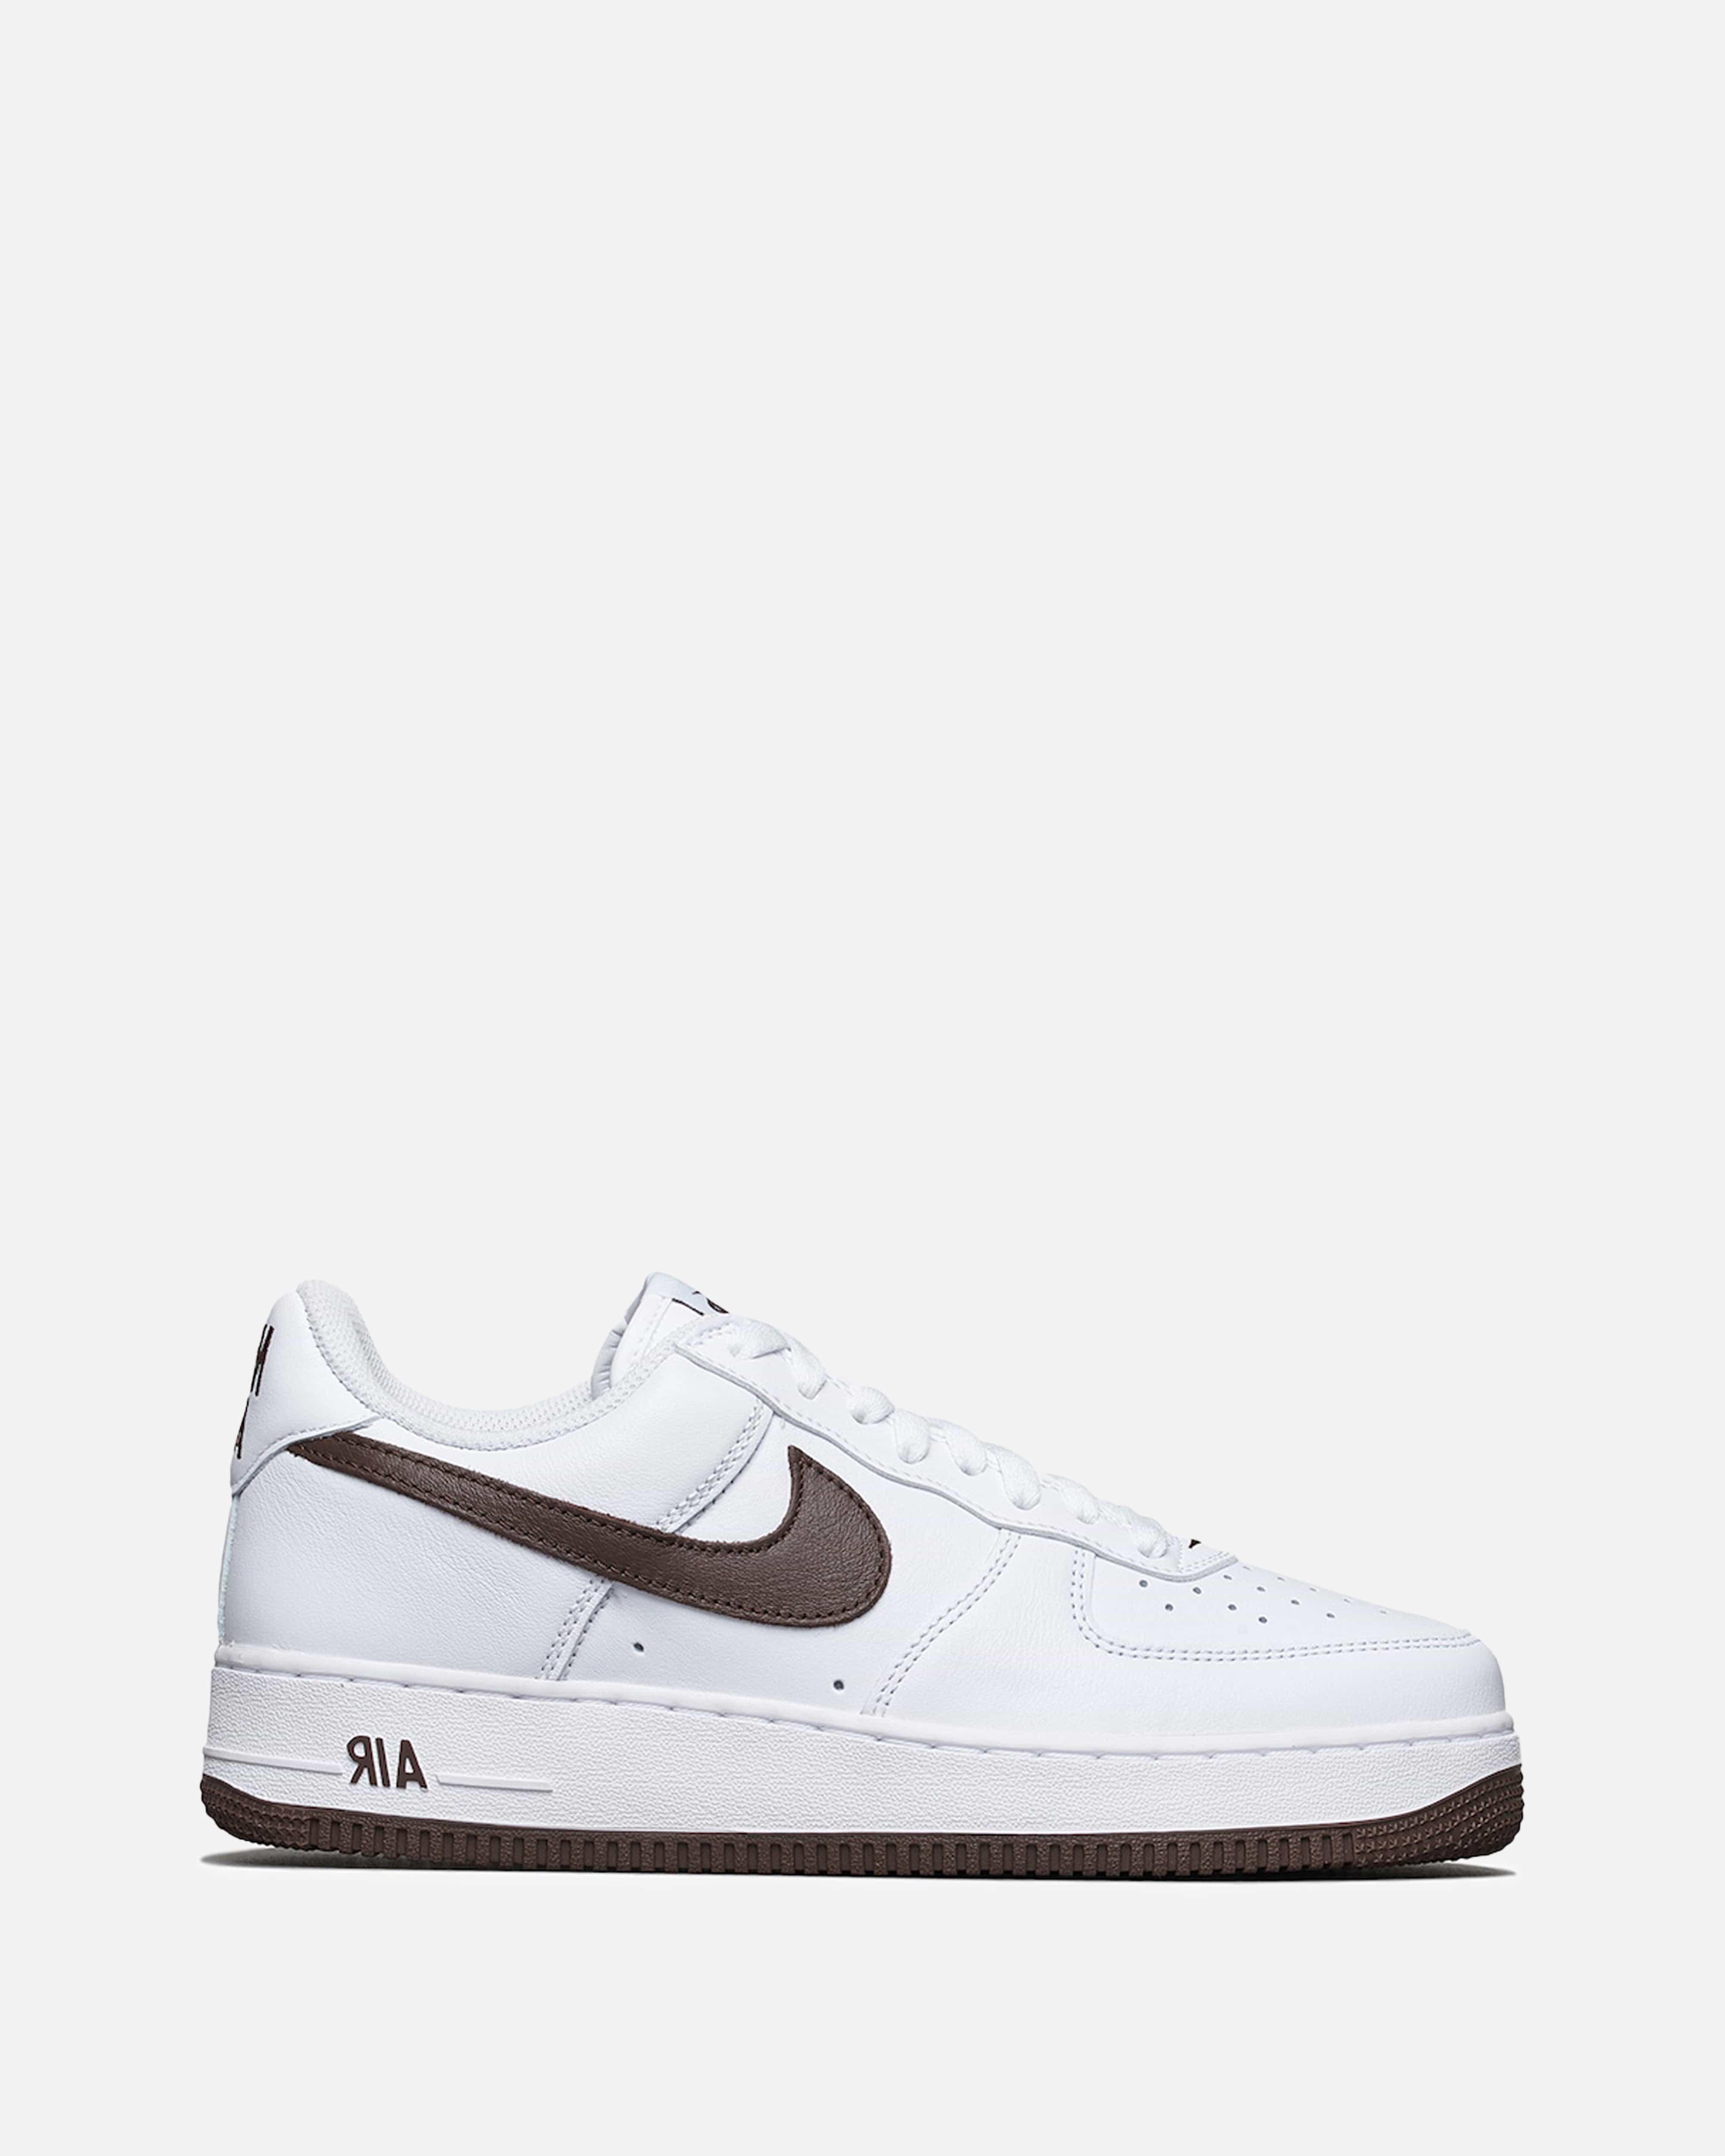 Nike Leather Air Force 1 Low Retro Sneaker in White/Chocolate/Metallic Gold  (White) for Men - Save 6% | Lyst